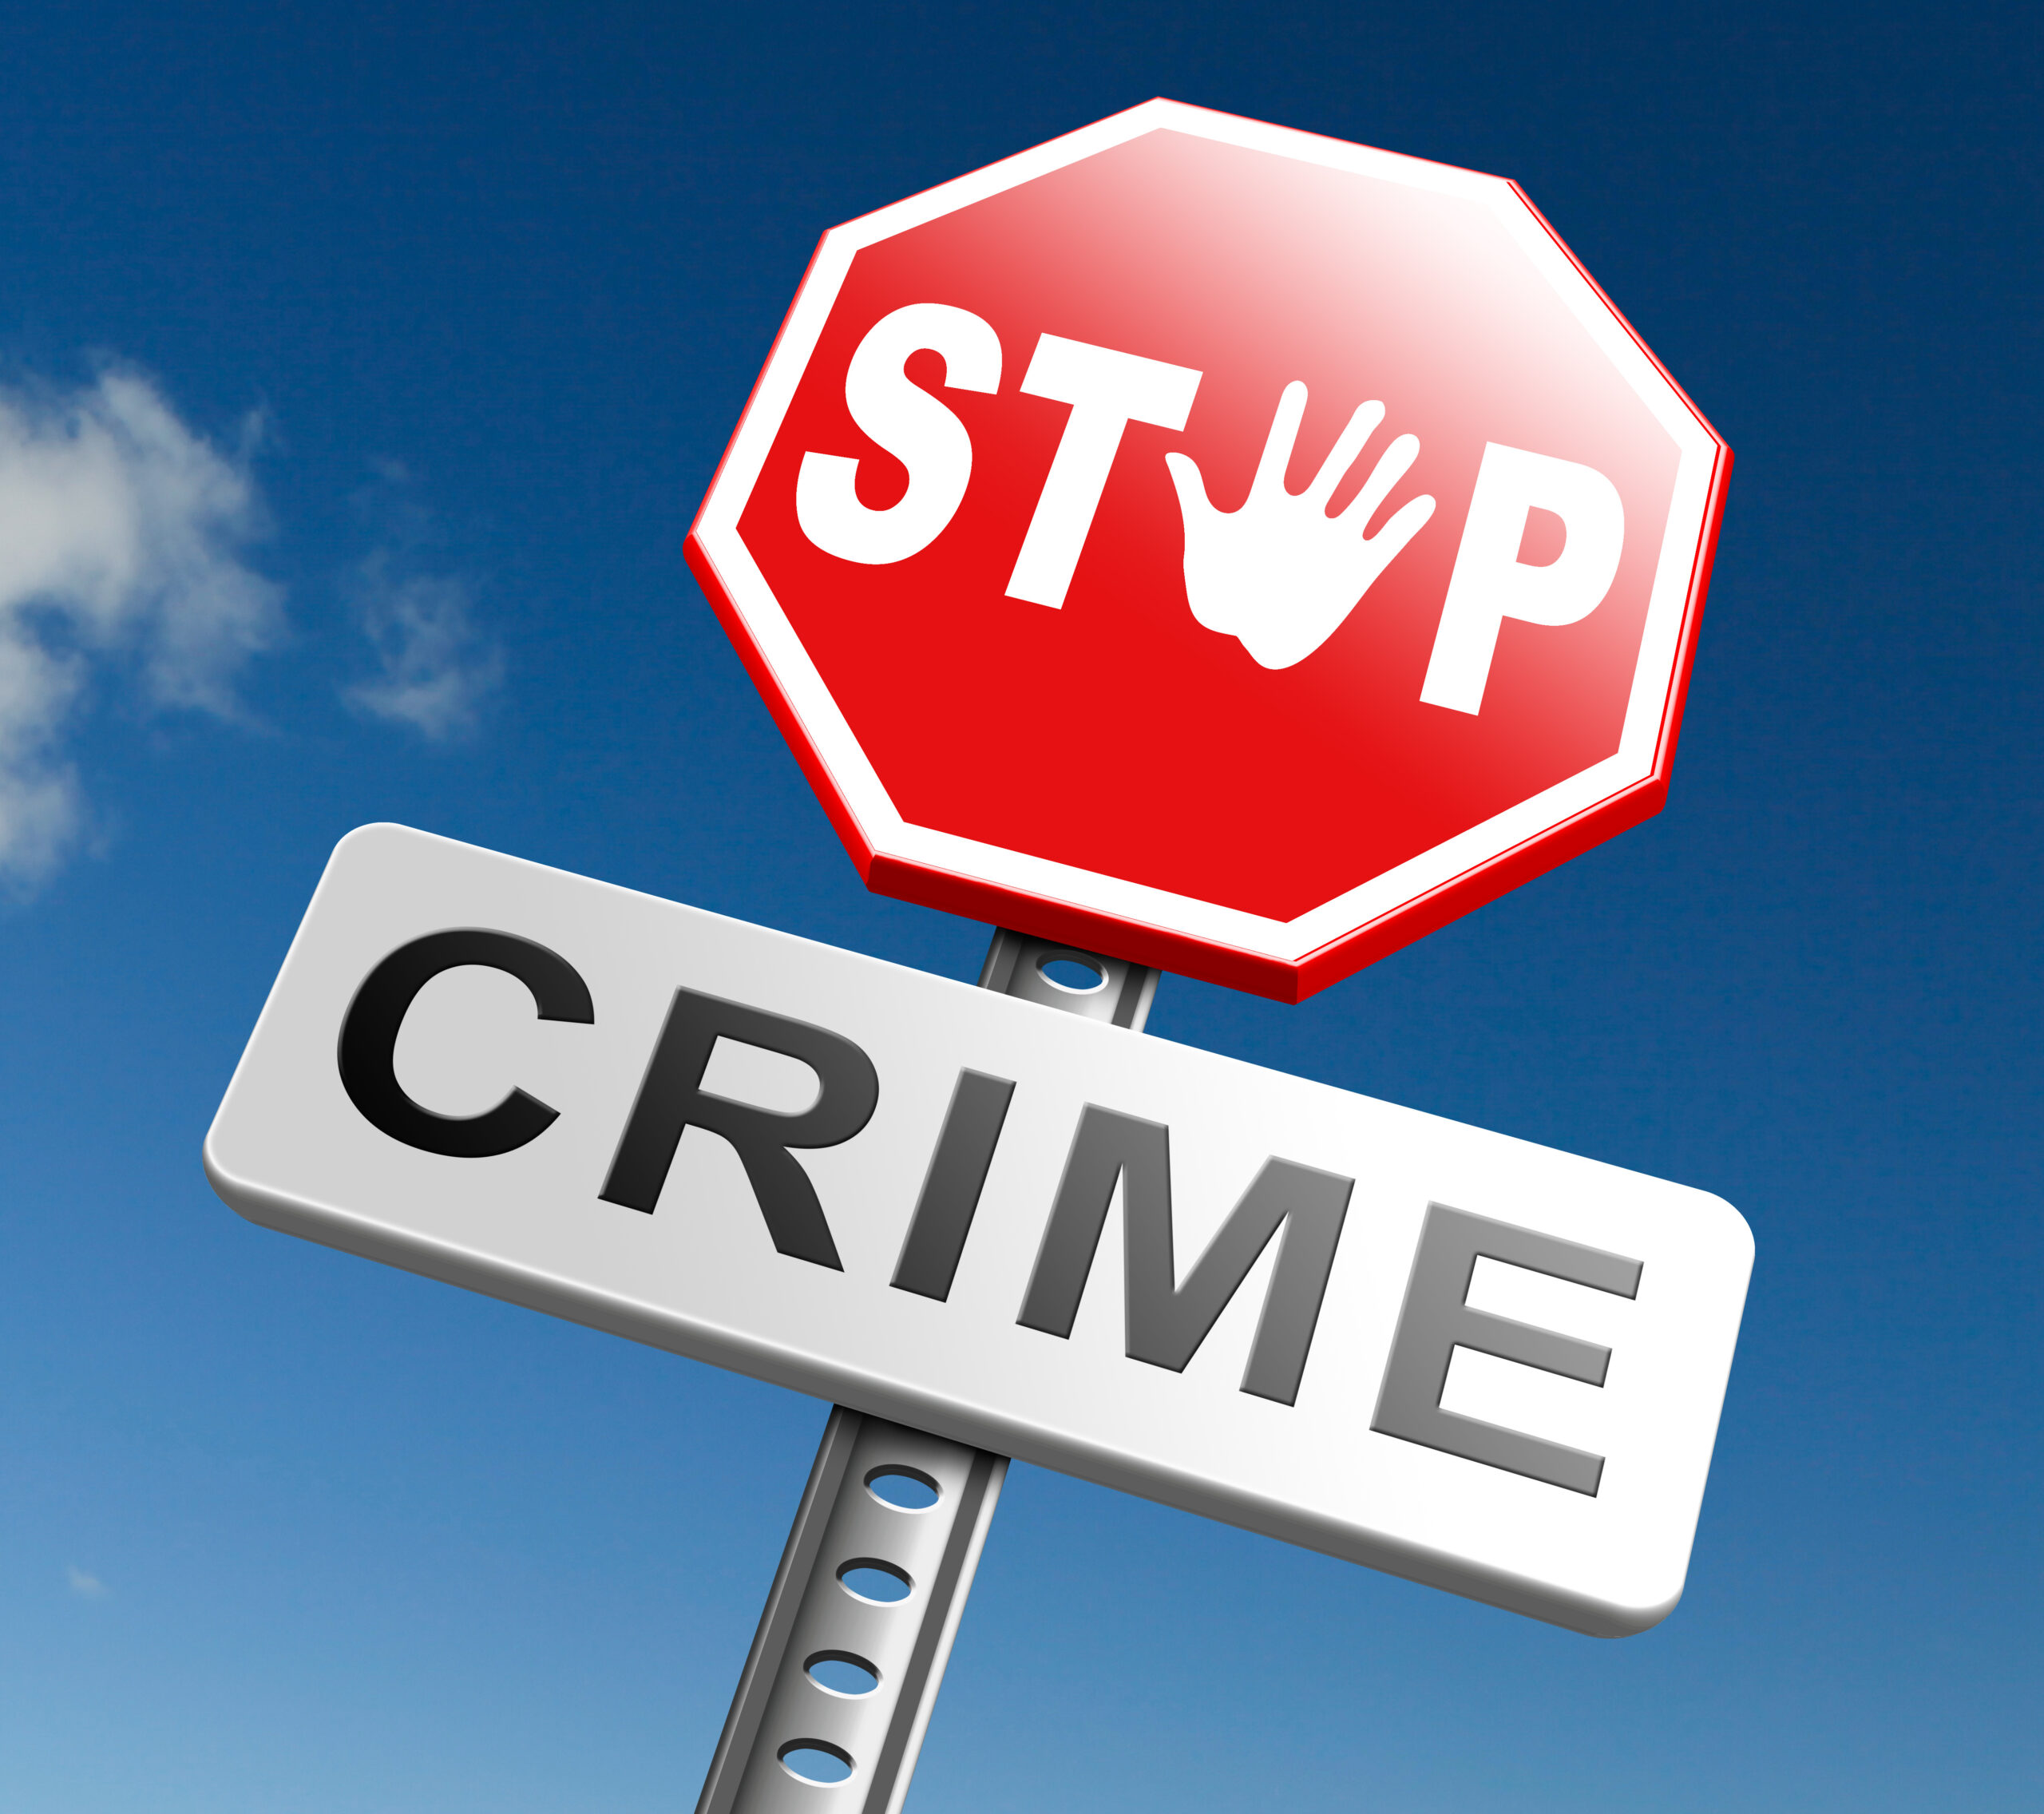 Stop crime sign board